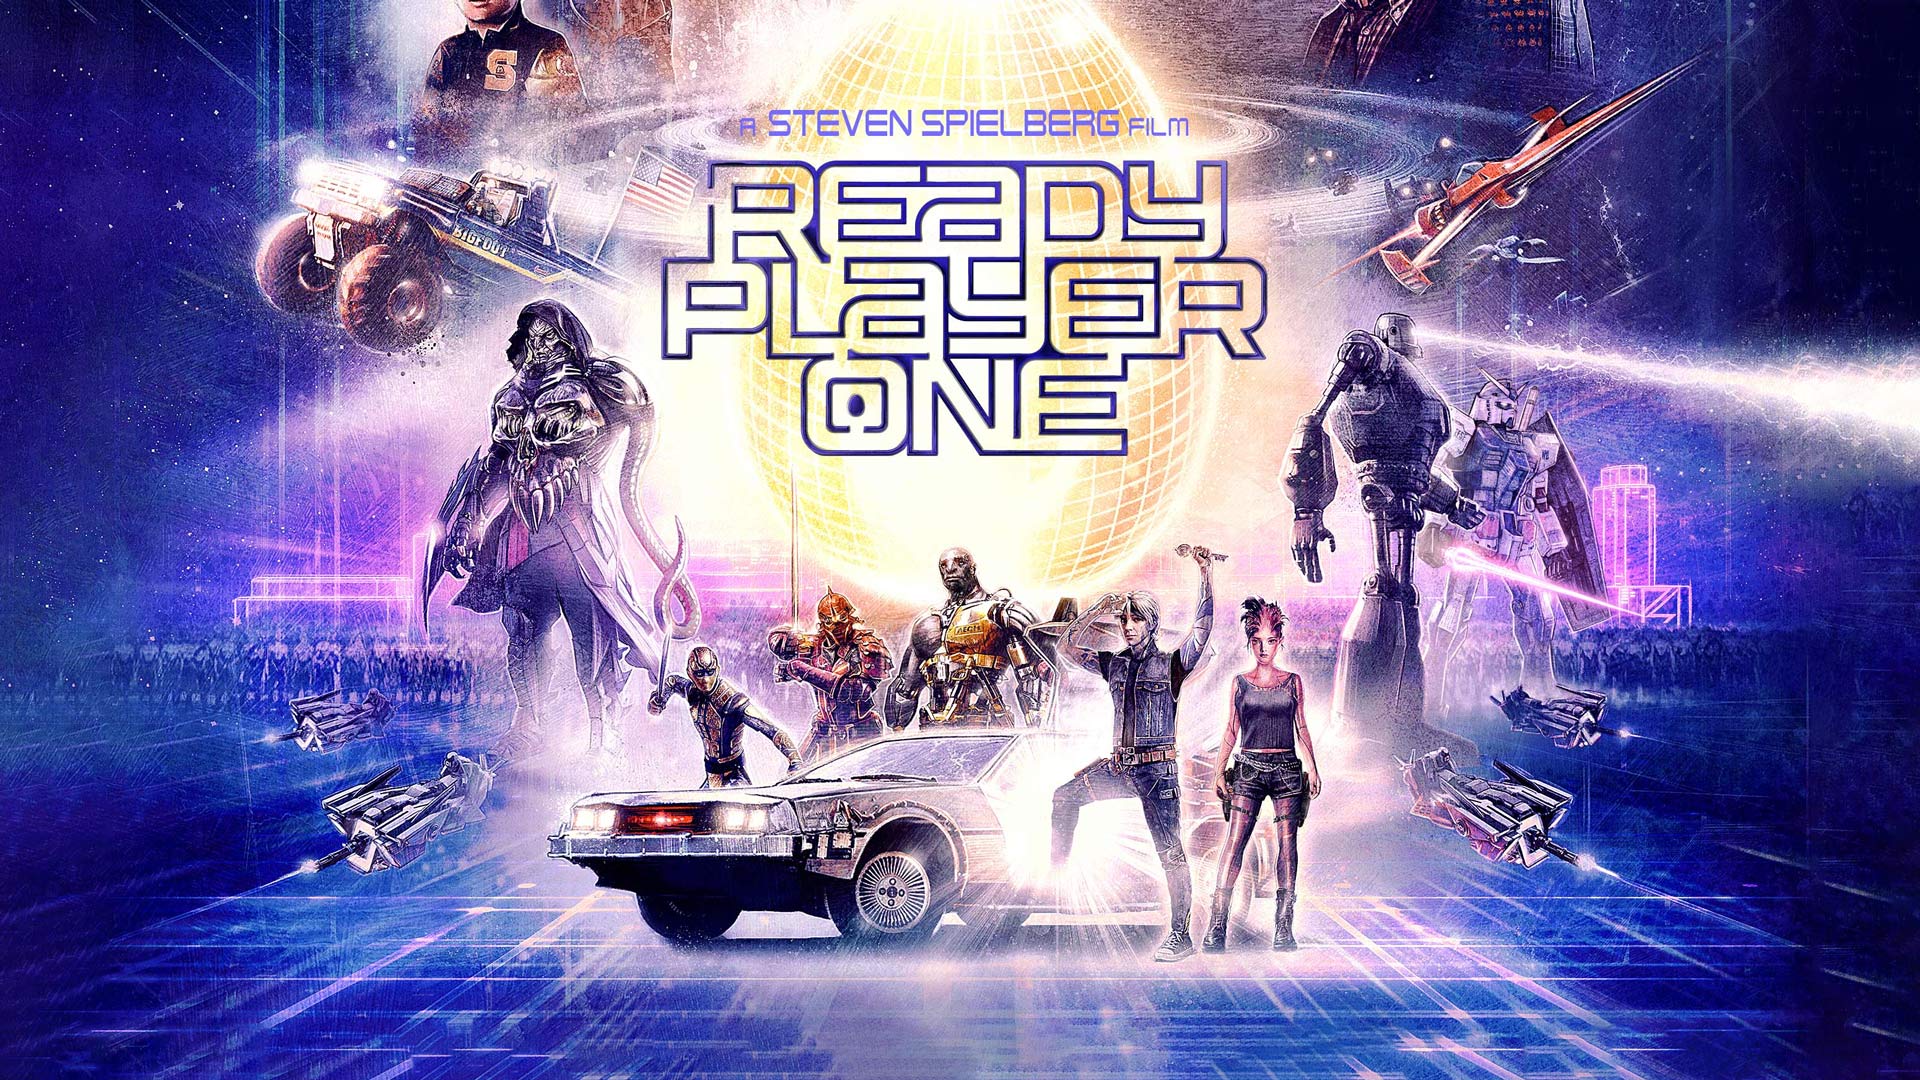 Ready Player One Rotten Tomatoes Score!